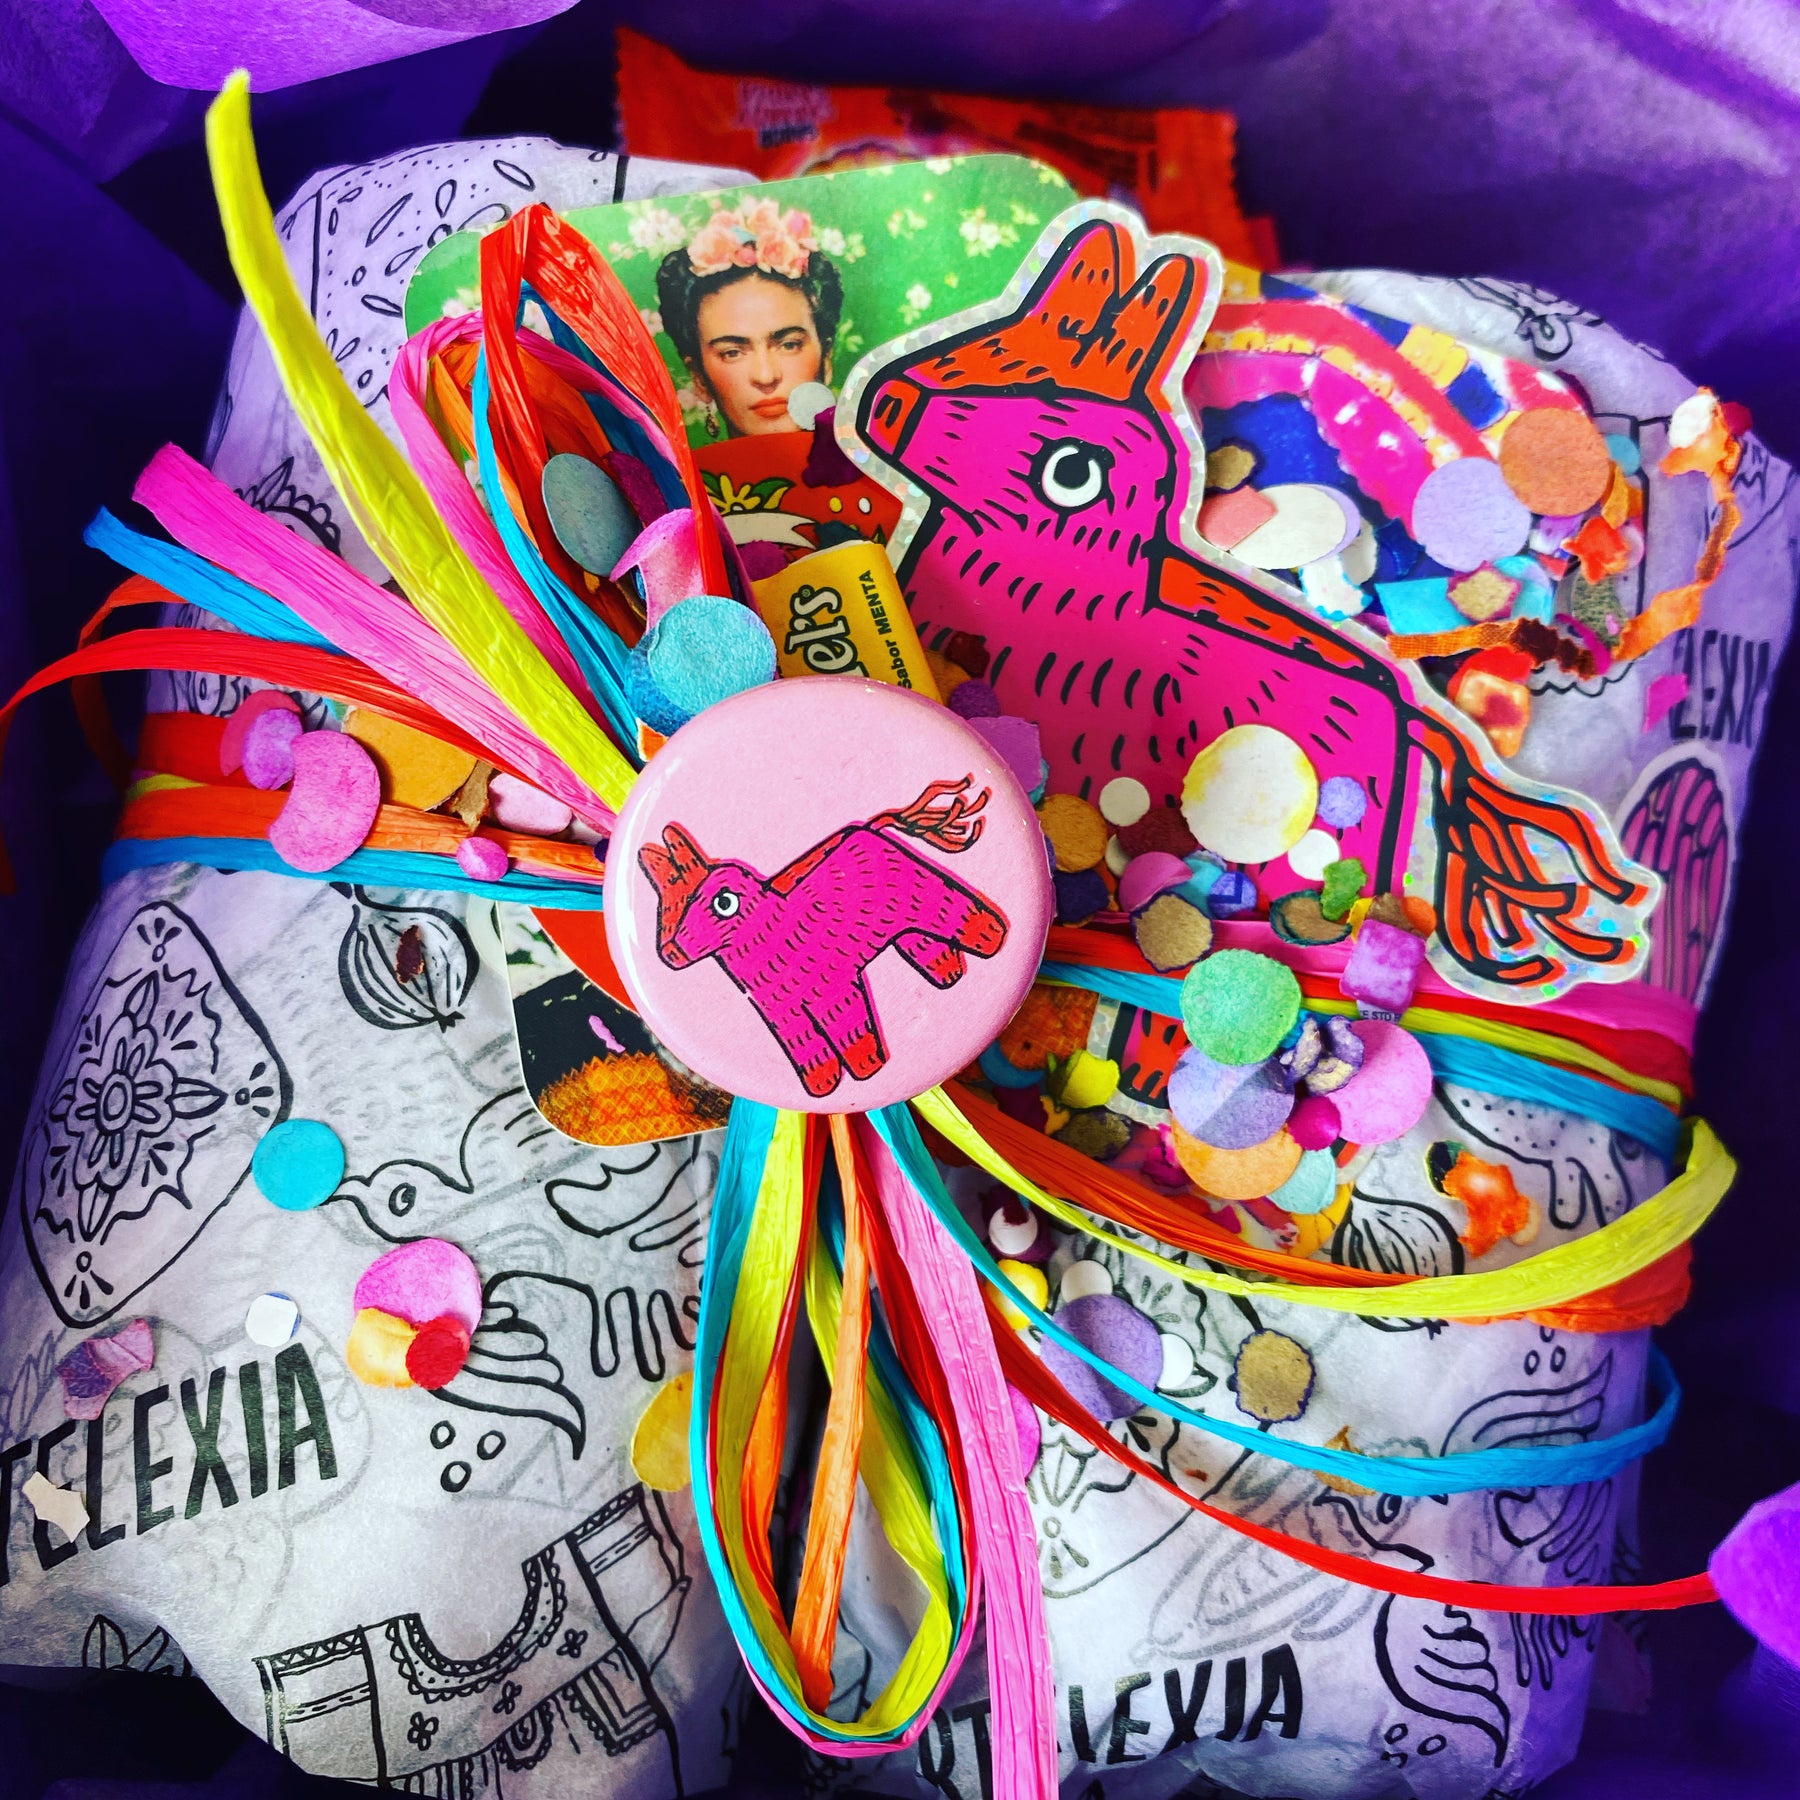 Photo of Artelexia product wrapped in Artelexia branded tissue paper and colorful ribbon